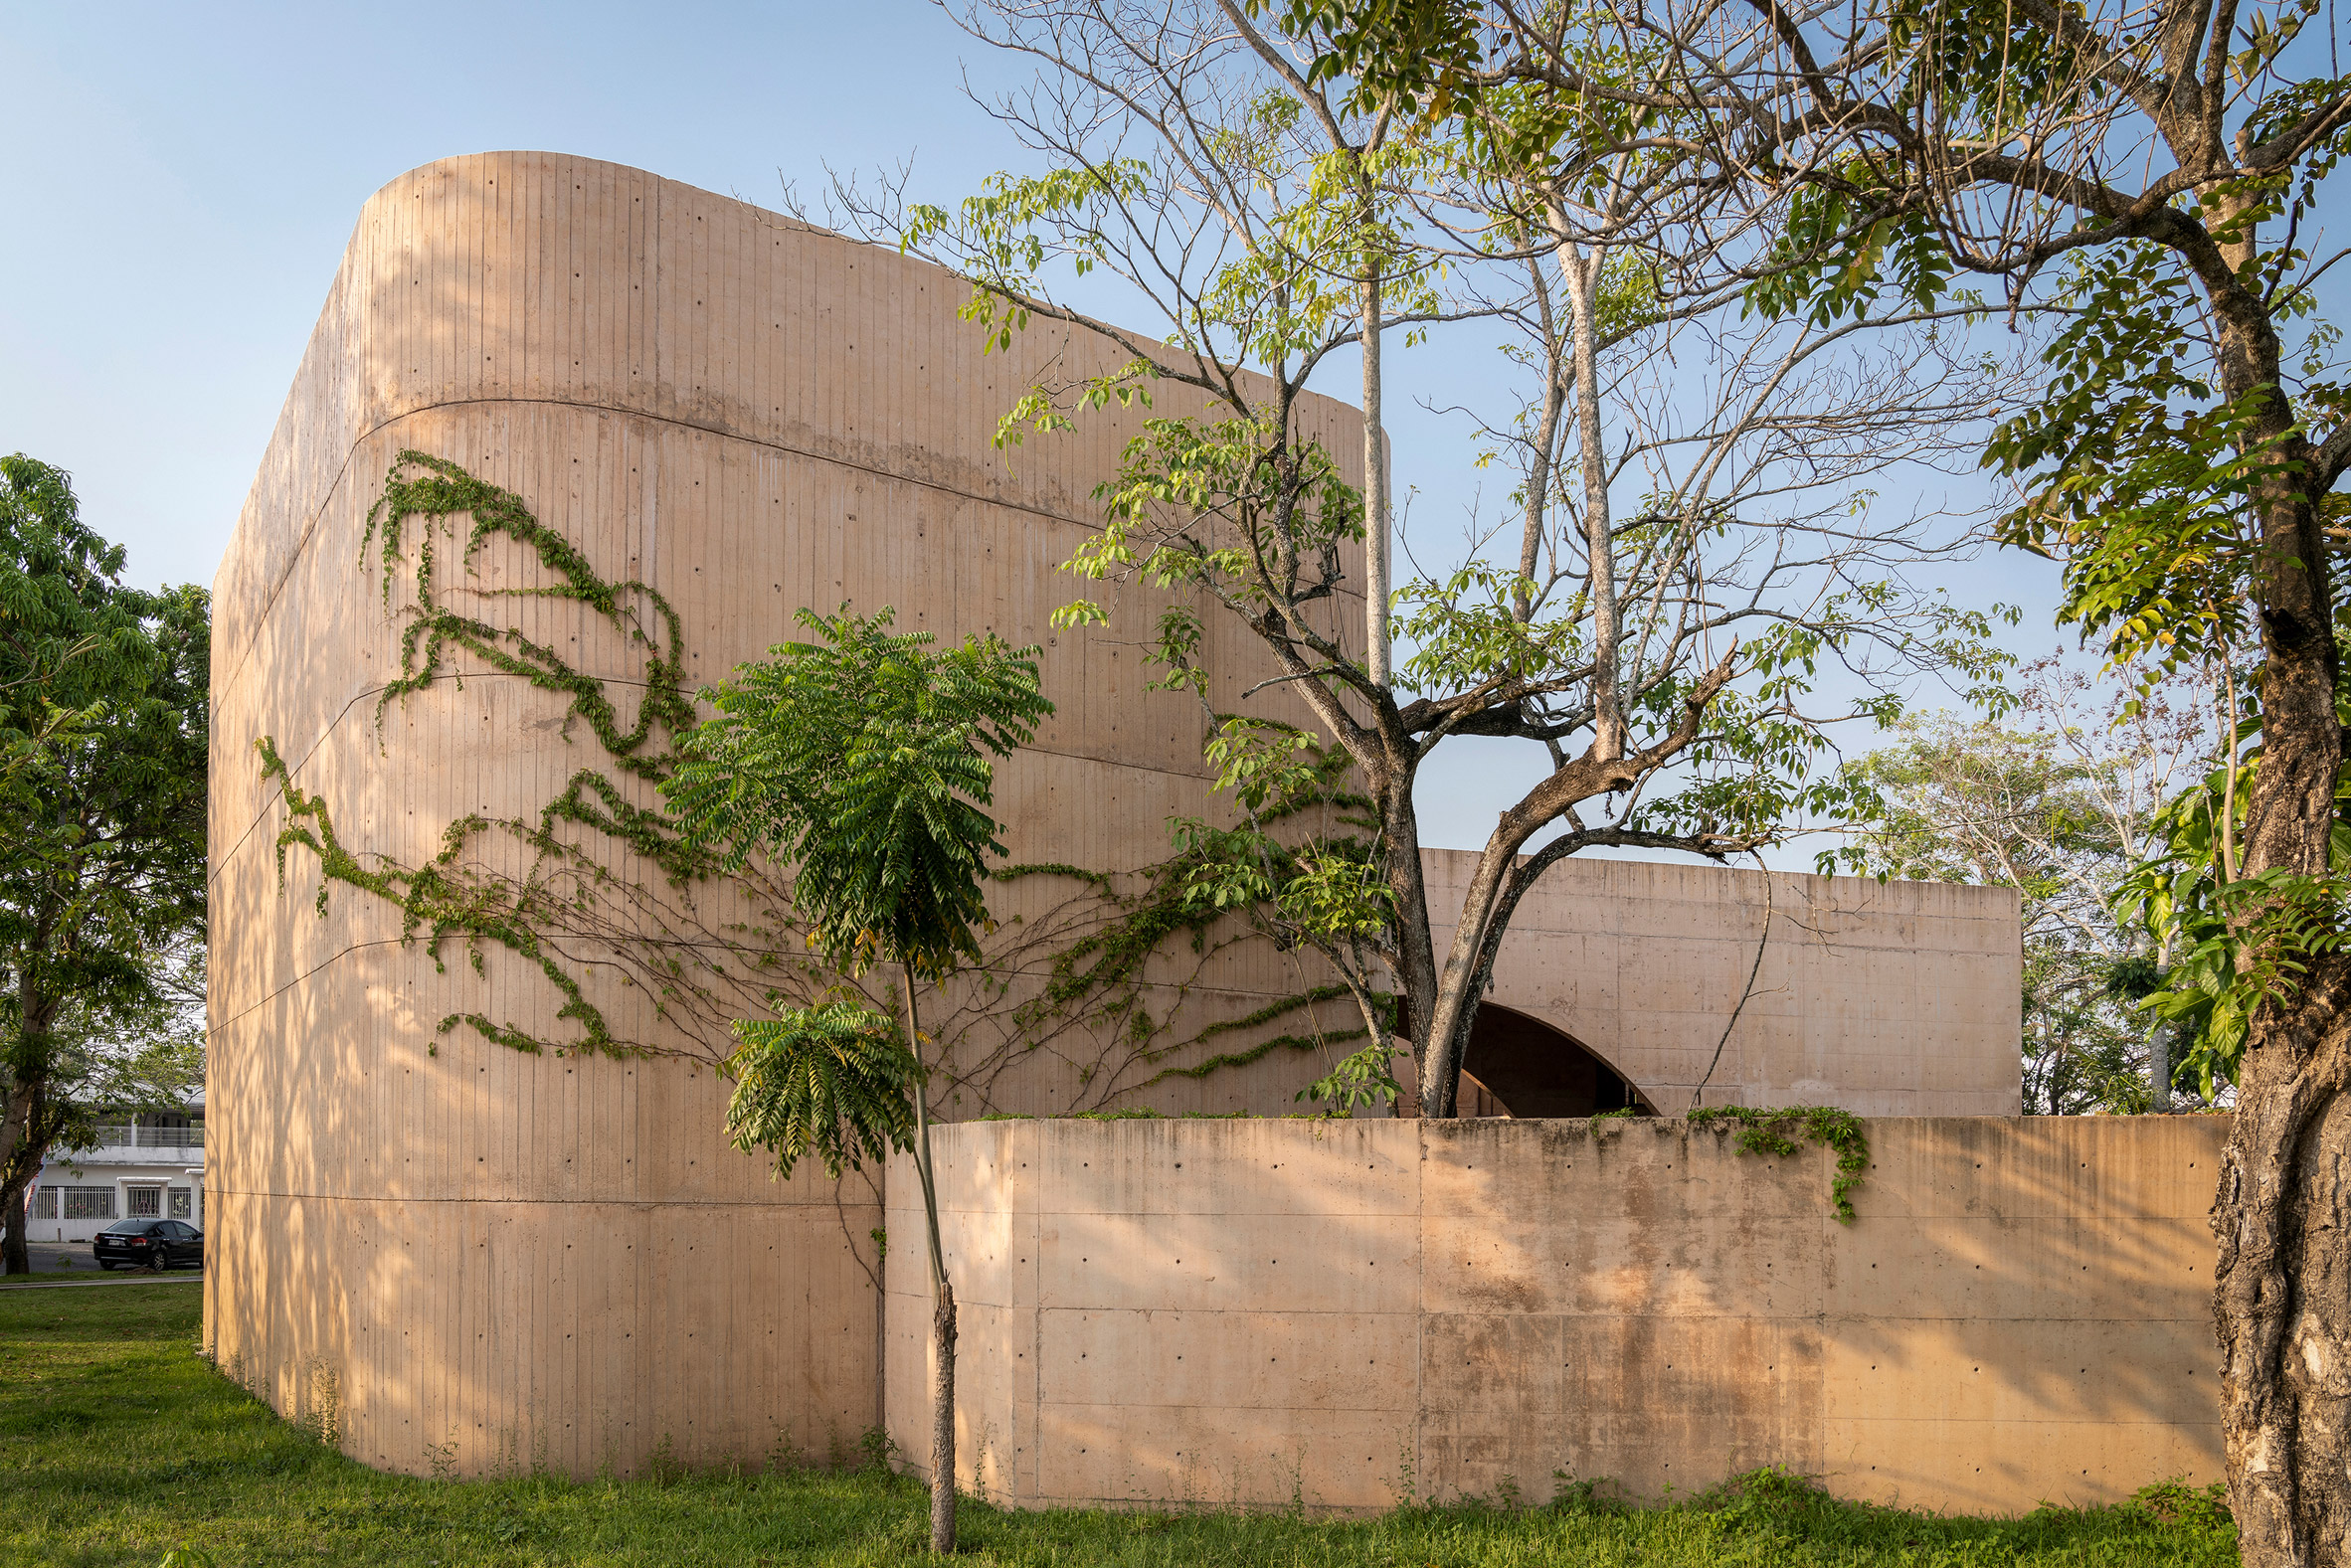 Sloped coloured concrete building in Mexico